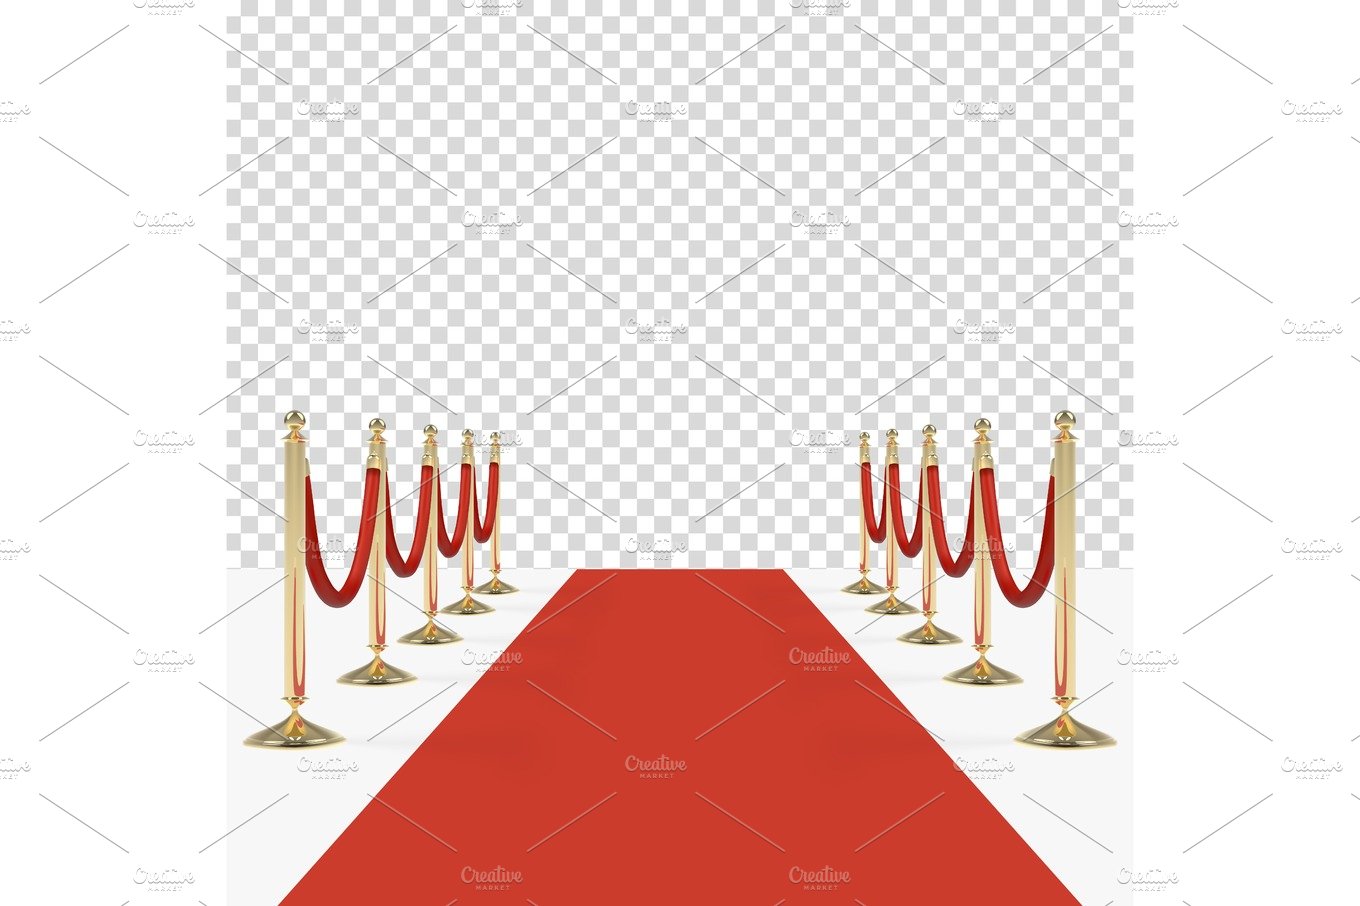 Red carpet with red ropes on golden stanchions cover image.